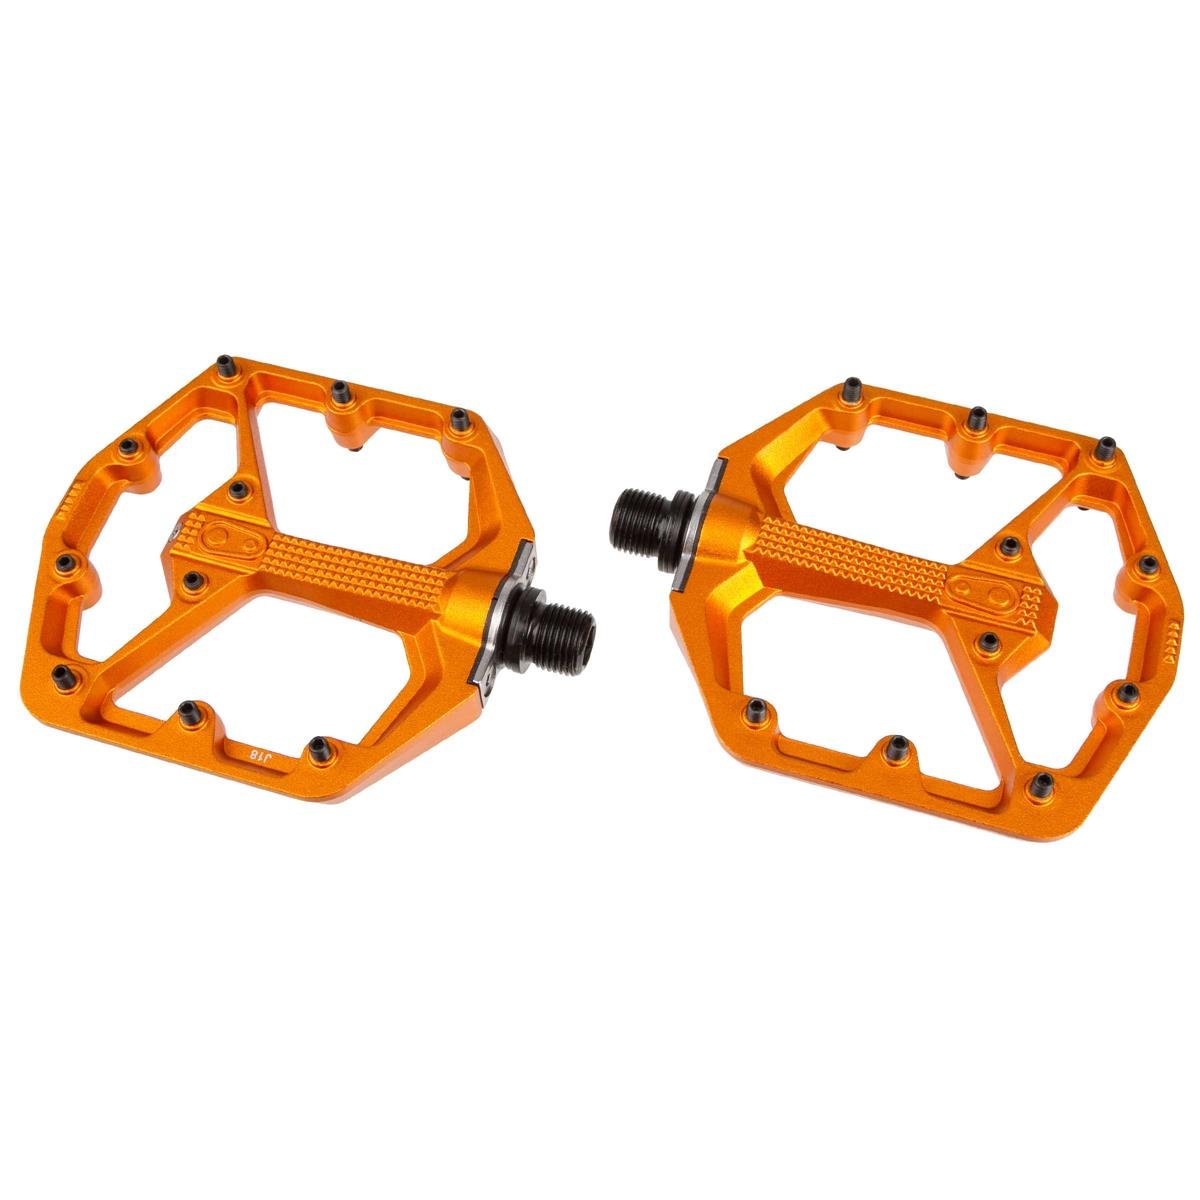 Crankbrothers Pedali Stamp 7 Limited Edition, Arancione, Small